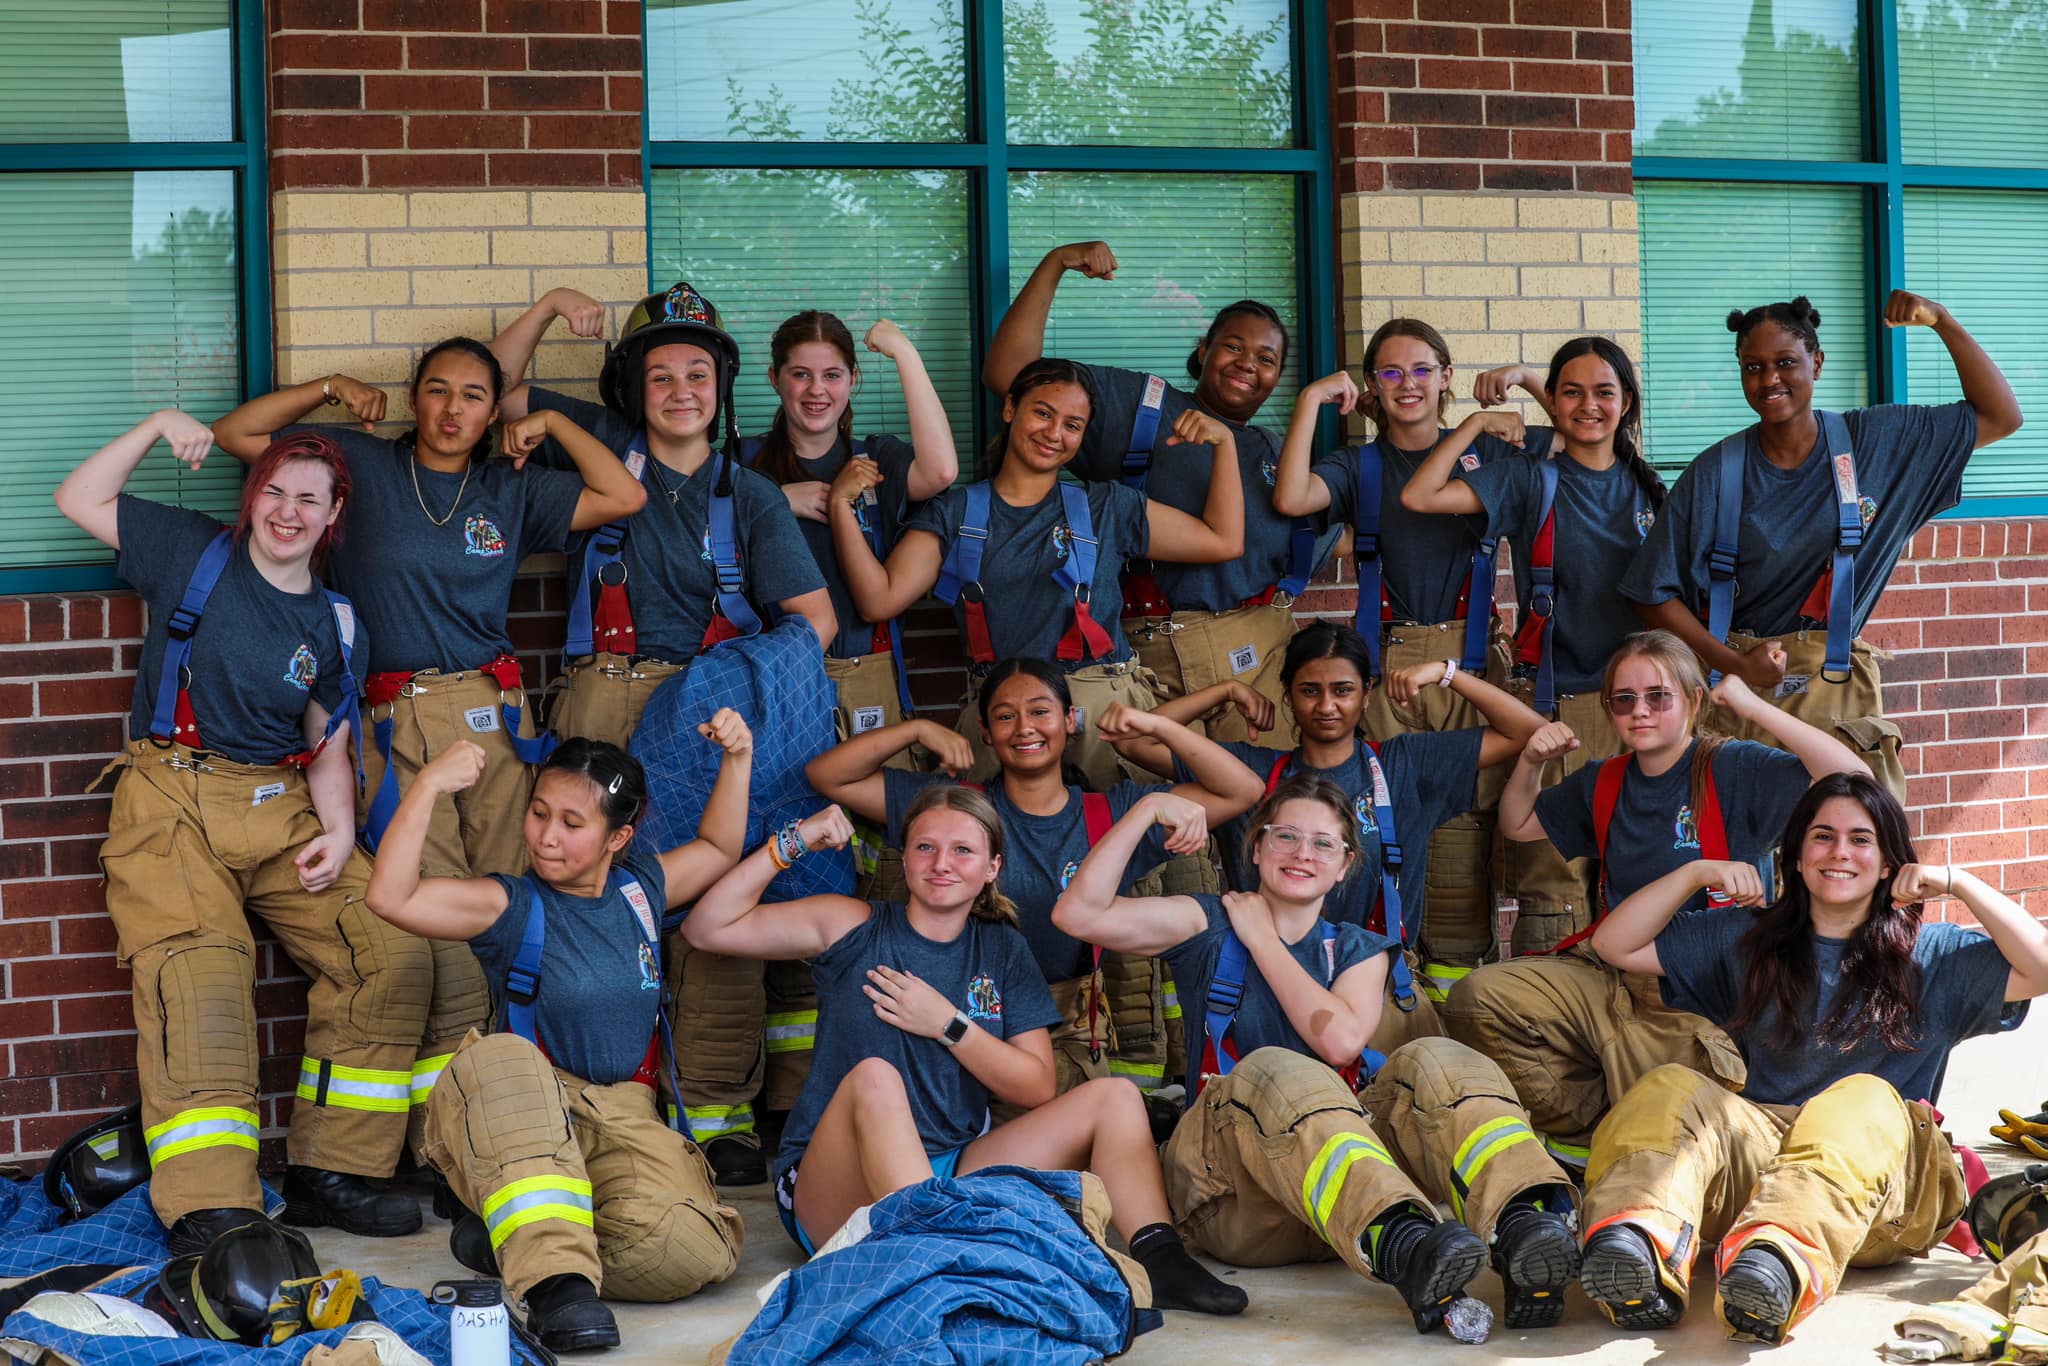 Katy Area Teens: Ignite Your Potential at HCESD48's Camp Spark This Summer